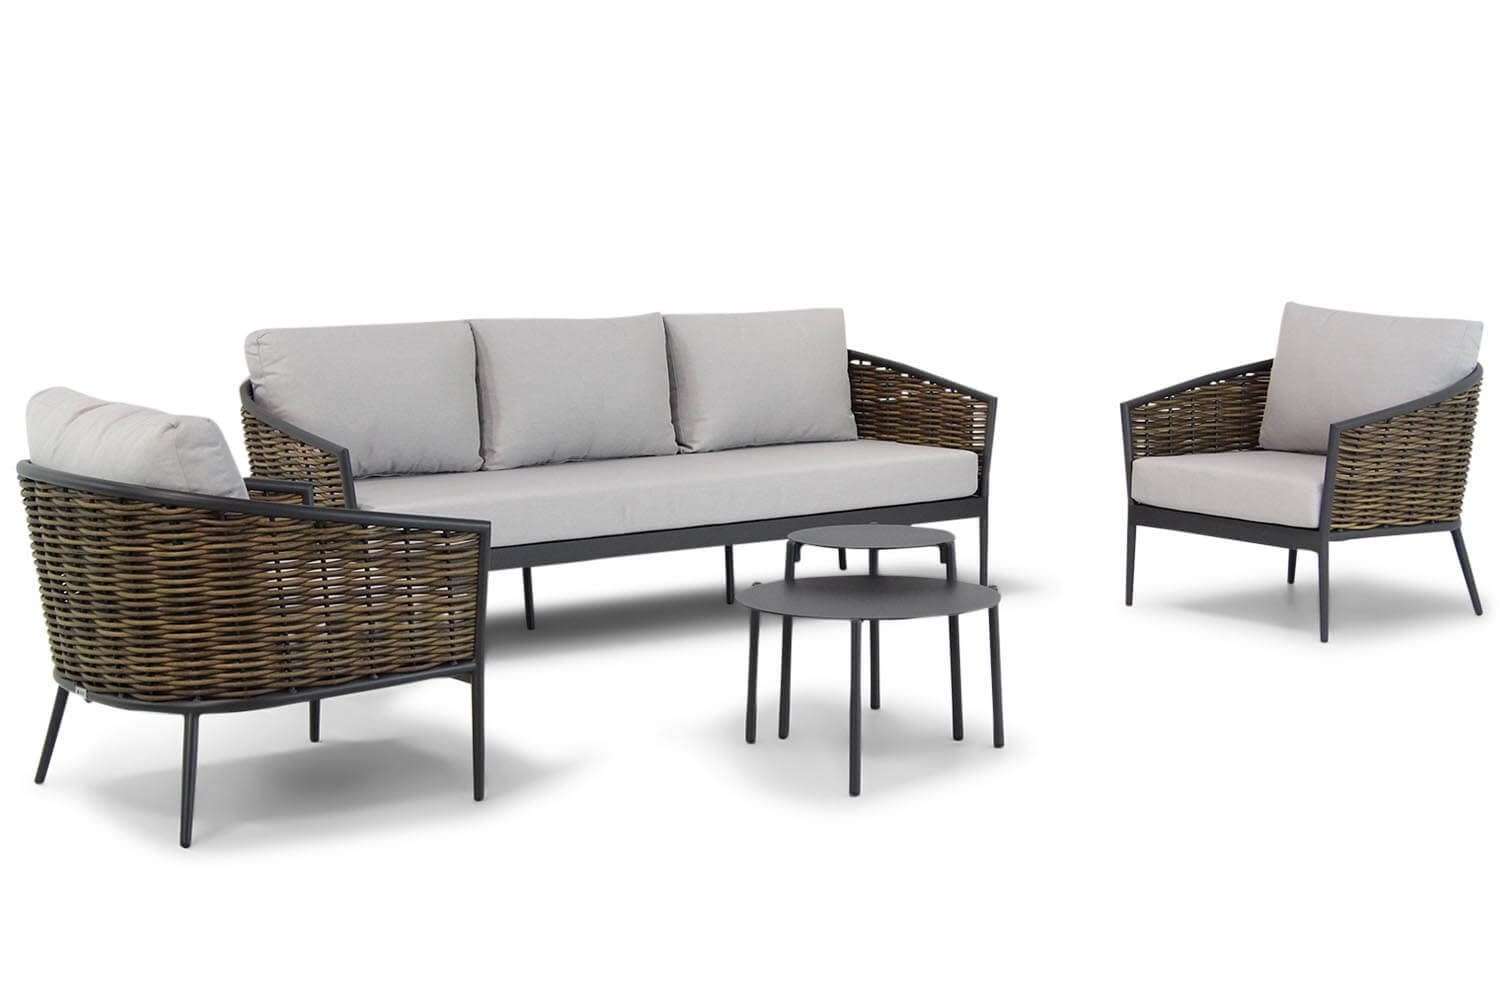 Aanbieding Coco Palm/Pacific 45/60 cm stoel-bank loungeset 5-delig